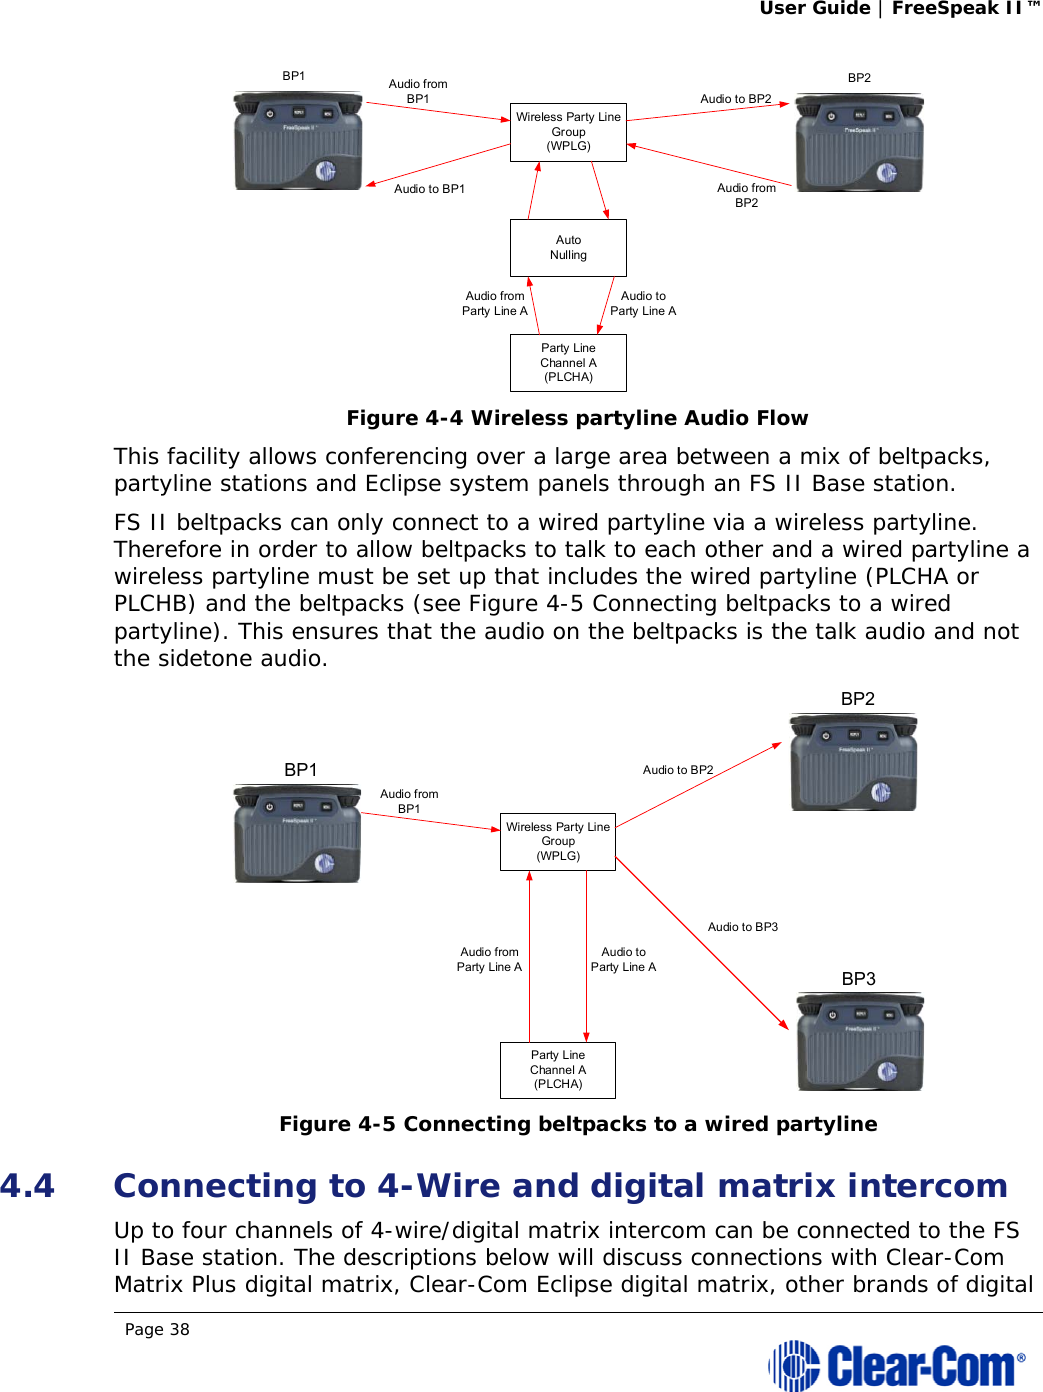 User Guide | FreeSpeak II™  Page 38   Figure 4-4 Wireless partyline Audio Flow This facility allows conferencing over a large area between a mix of beltpacks, partyline stations and Eclipse system panels through an FS II Base station. FS II beltpacks can only connect to a wired partyline via a wireless partyline. Therefore in order to allow beltpacks to talk to each other and a wired partyline a wireless partyline must be set up that includes the wired partyline (PLCHA or PLCHB) and the beltpacks (see Figure 4-5 Connecting beltpacks to a wired partyline). This ensures that the audio on the beltpacks is the talk audio and not the sidetone audio.  Figure 4-5 Connecting beltpacks to a wired partyline 4.4 Connecting to 4-Wire and digital matrix intercom Up to four channels of 4-wire/digital matrix intercom can be connected to the FS II Base station. The descriptions below will discuss connections with Clear-Com Matrix Plus digital matrix, Clear-Com Eclipse digital matrix, other brands of digital Wireless Party Line Group(WPLG)AutoNullingParty LineChannel A(PLCHA)BP1 BP2Audio from BP1Audio to BP1 Audio from BP2Audio to BP2Audio fromParty Line AAudio toParty Line AWireless Party Line Group(WPLG)Party LineChannel A(PLCHA)BP1BP2Audio from BP1Audio to BP2Audio fromParty Line AAudio toParty Line ABP3Audio to BP3